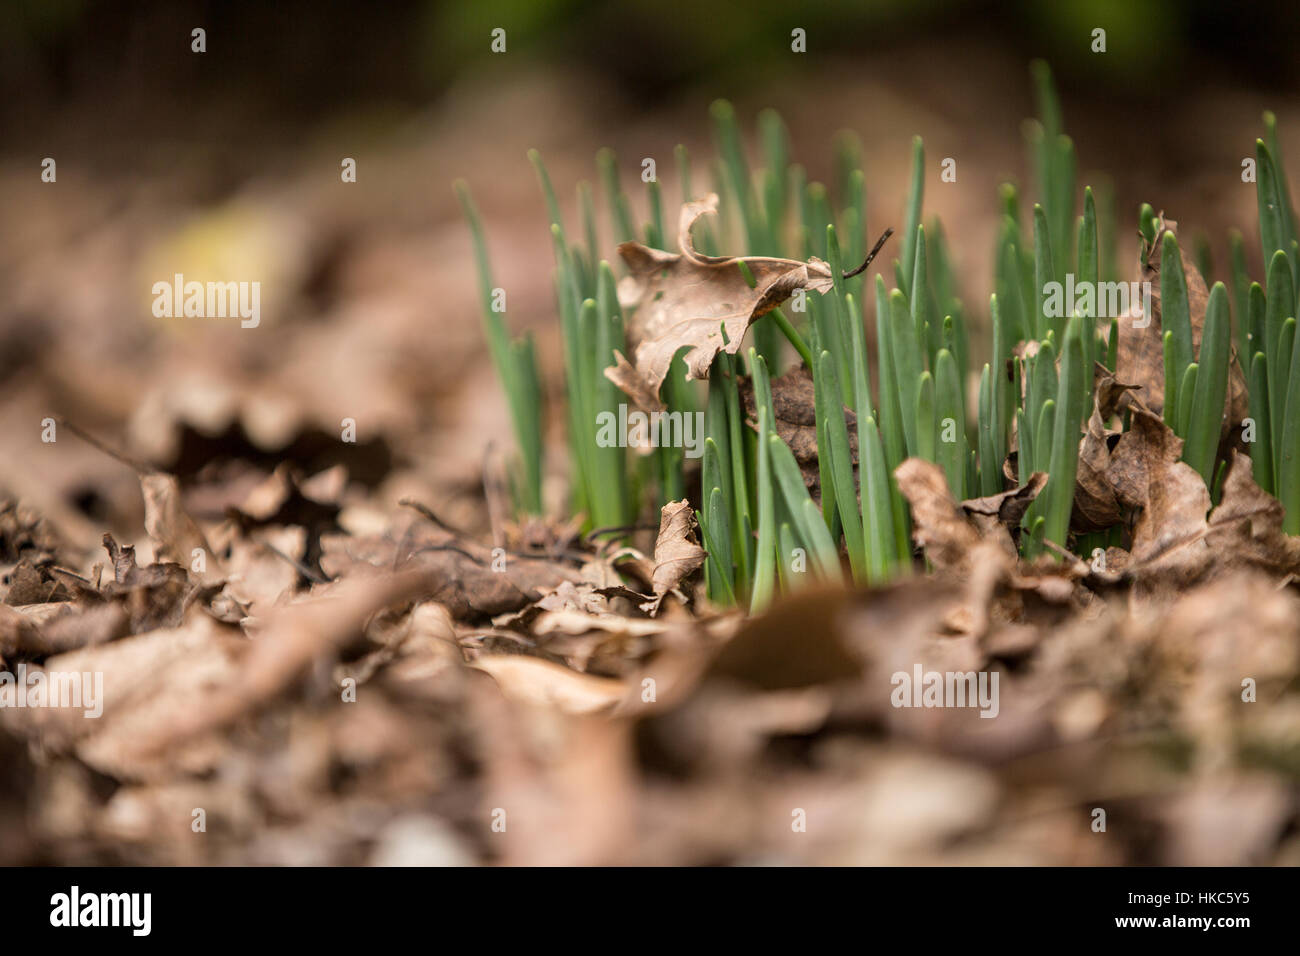 A plant begins to sprout, confused by the warm winter weather. Stock Photo